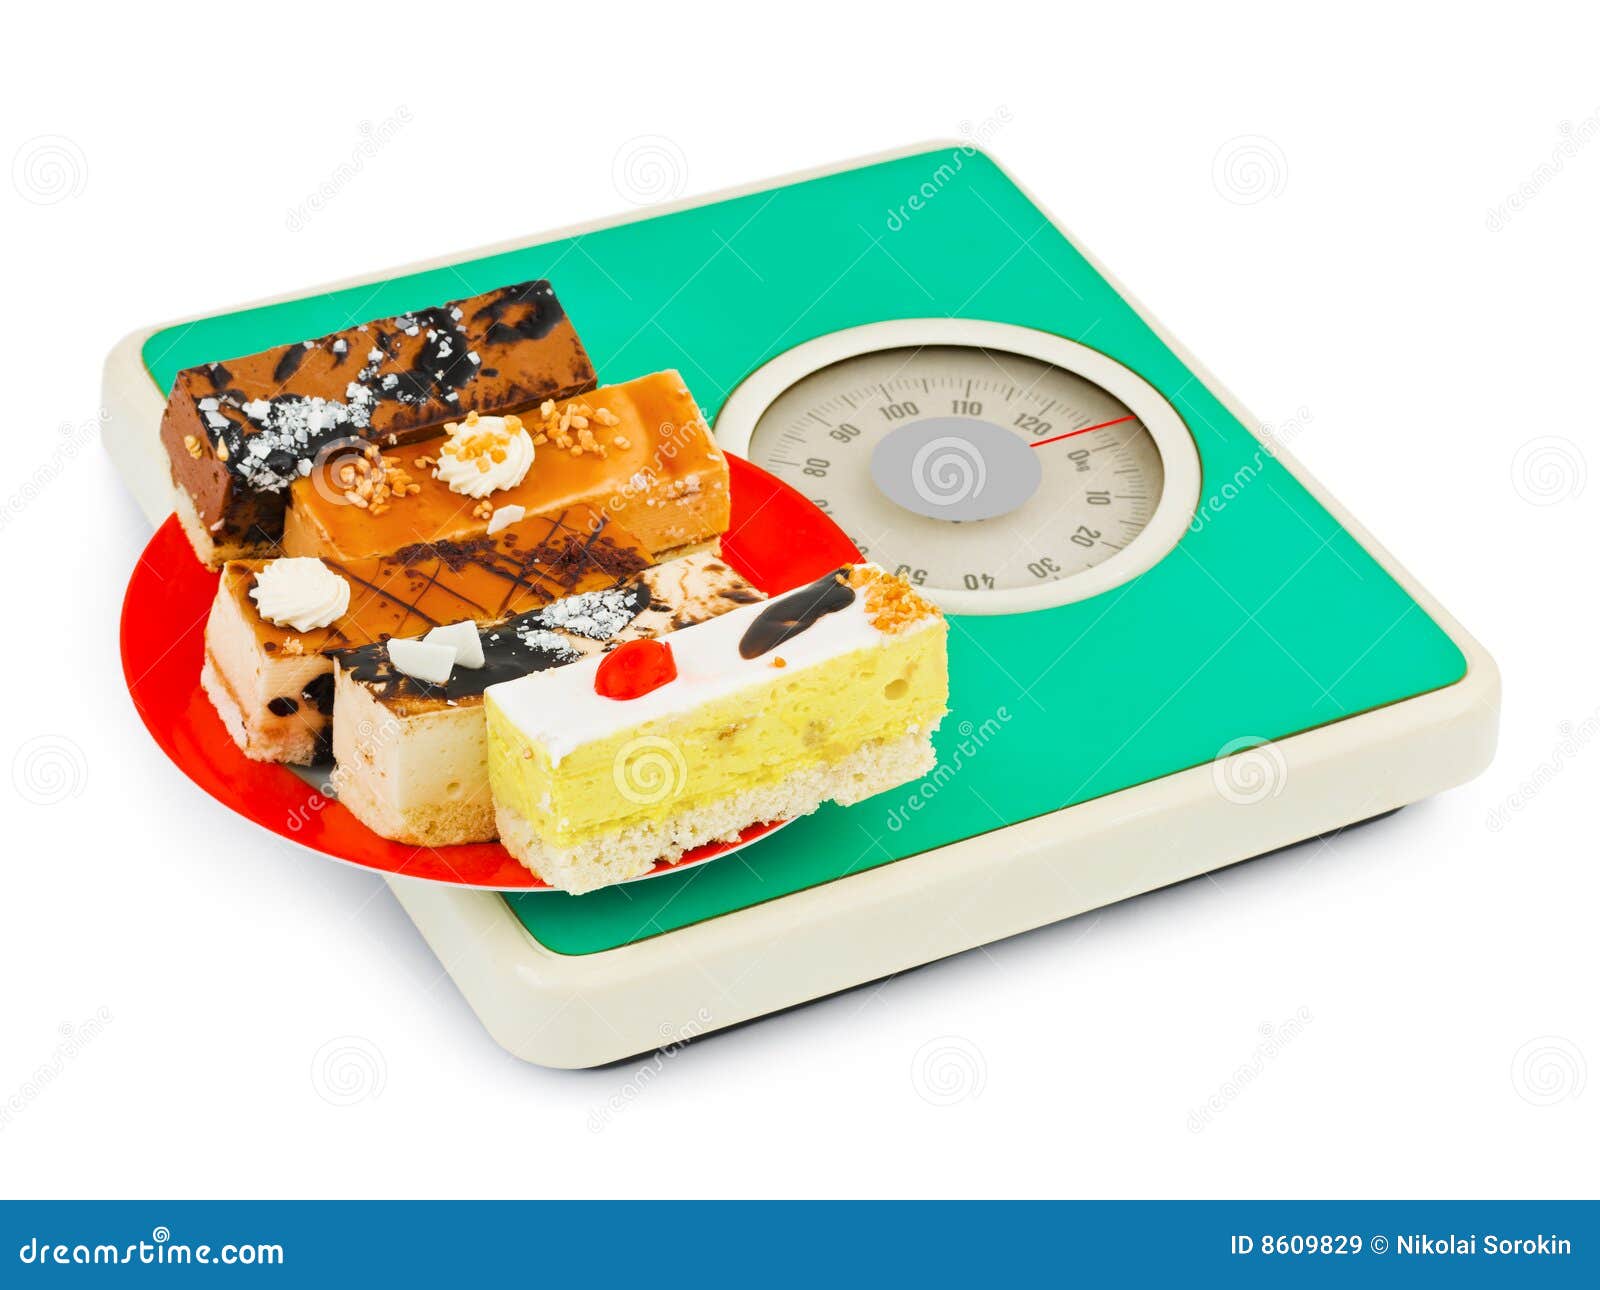 Cake Weight Machine in Agra - Dealers, Manufacturers & Suppliers - Justdial